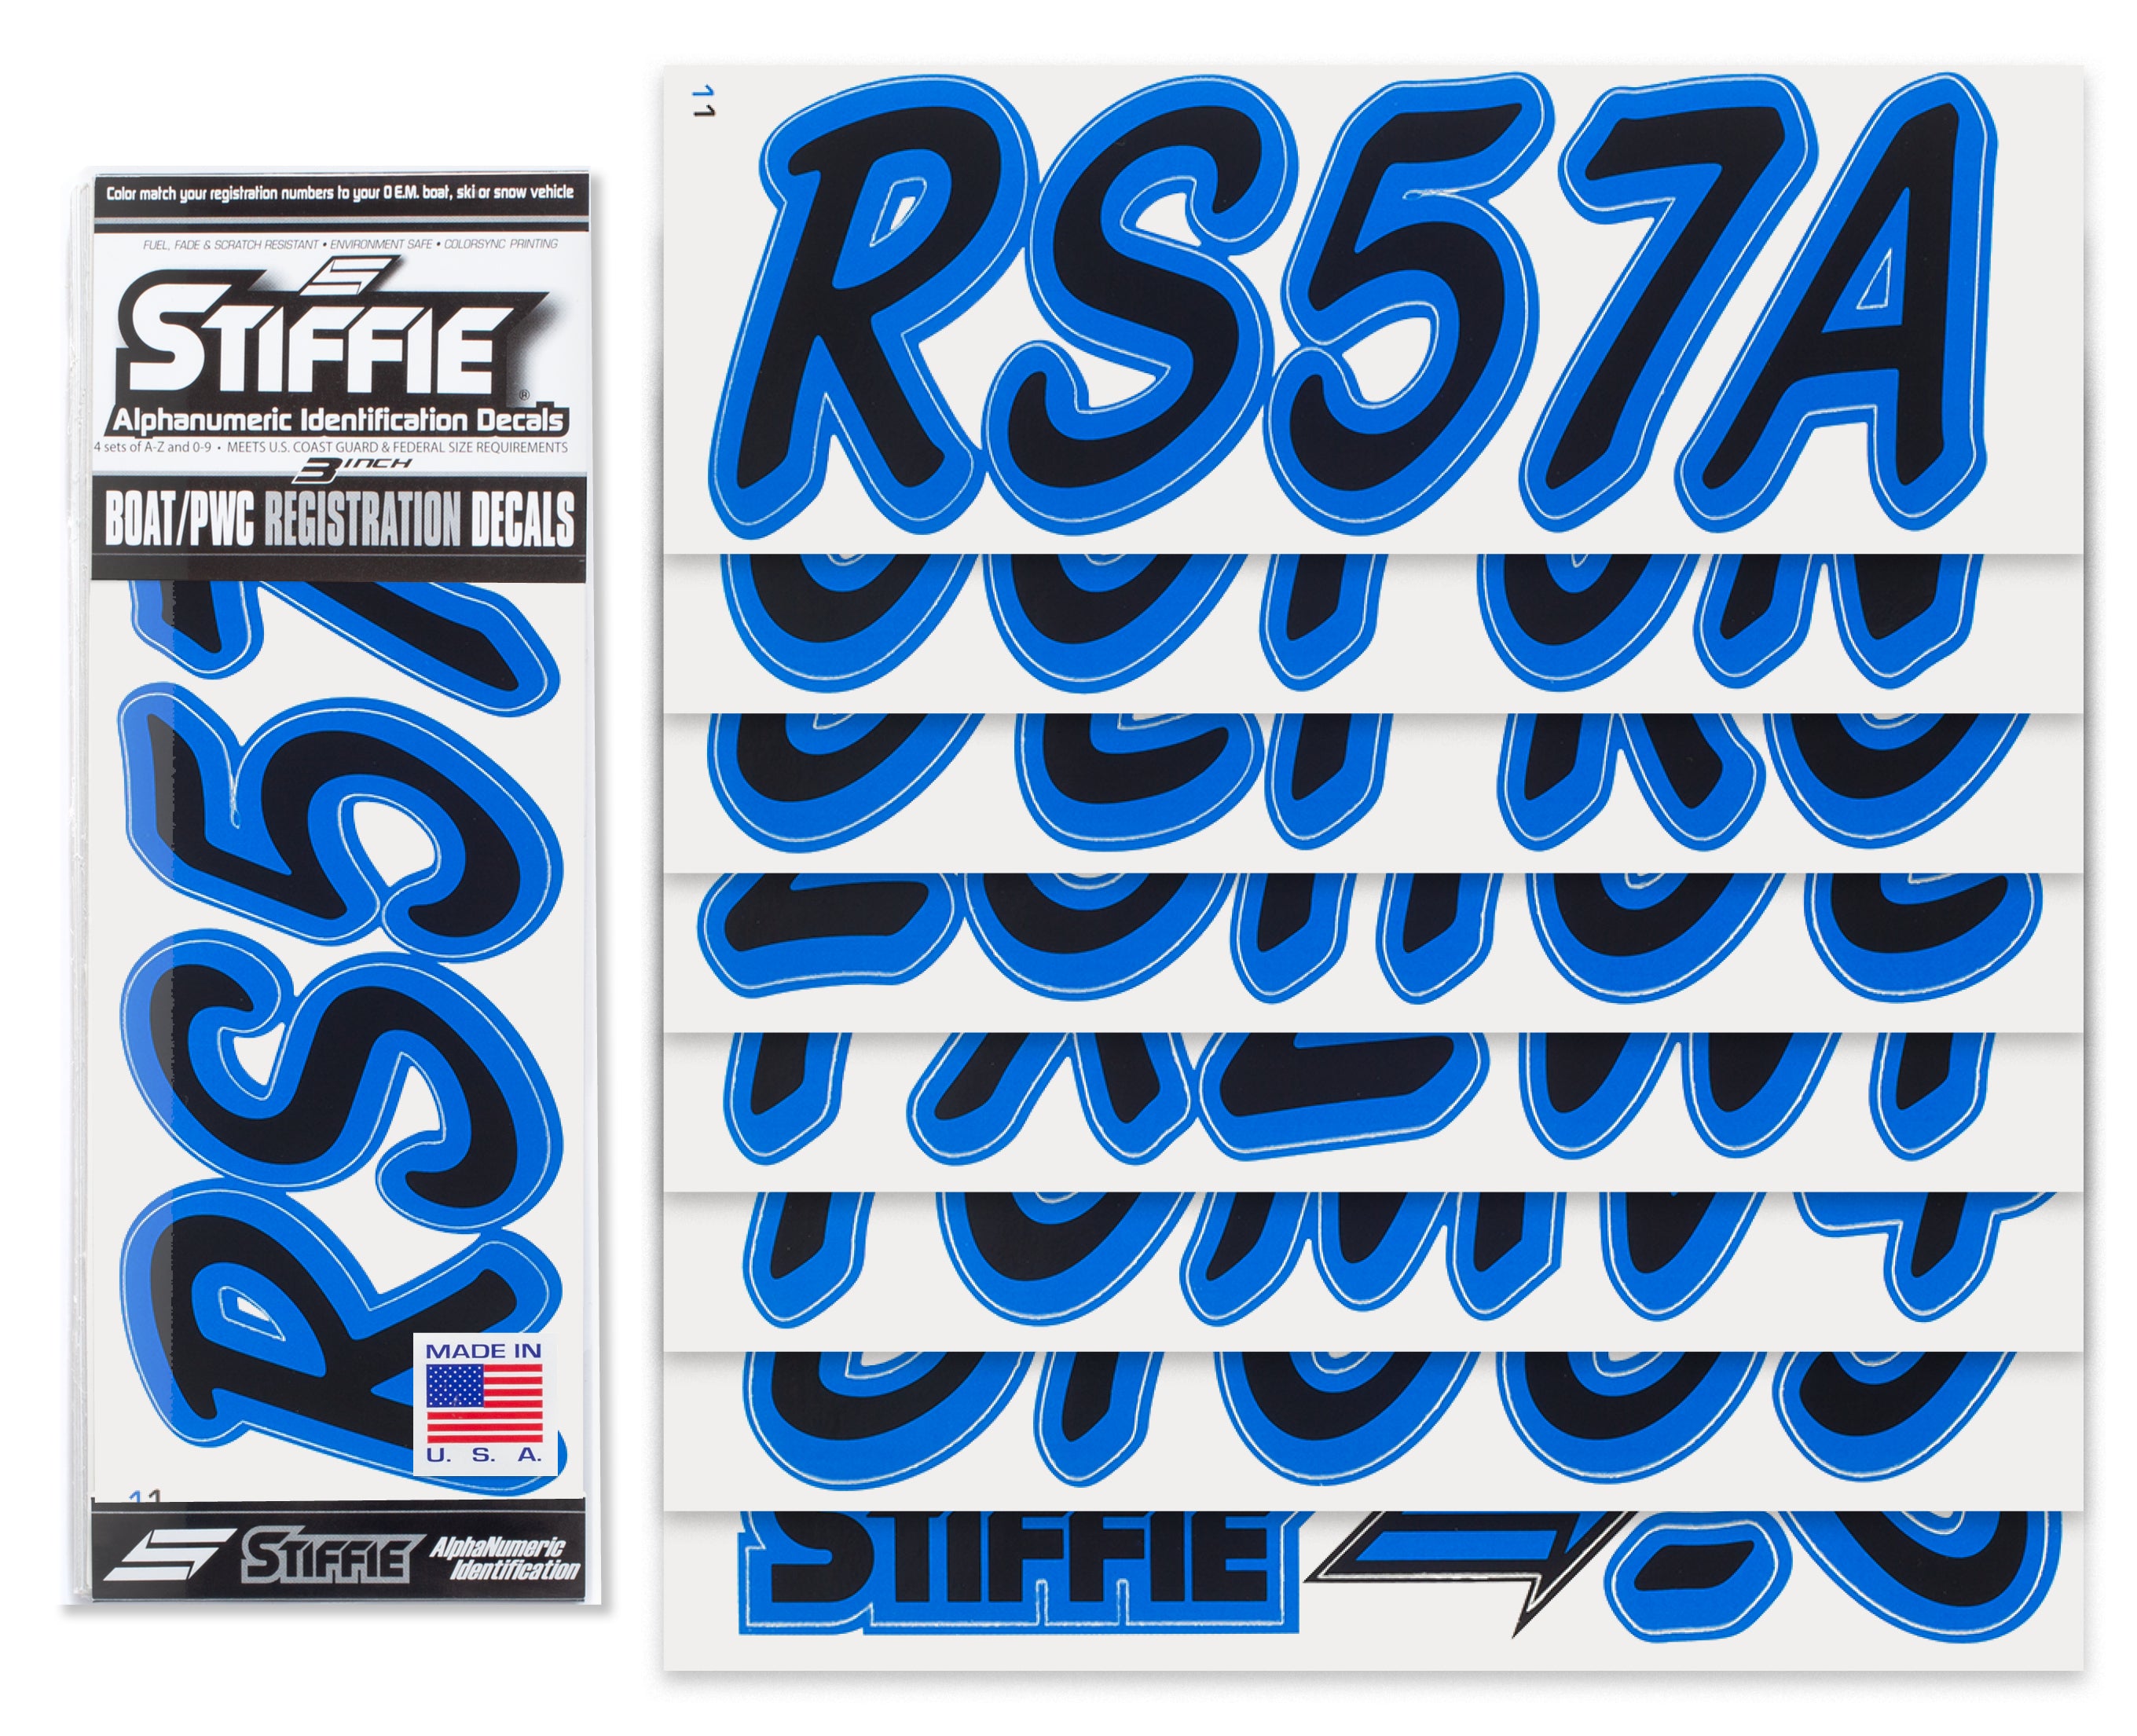 STIFFIE Whipline Solid Black/Blue 3" Alpha-Numeric Registration Identification Numbers Stickers Decals for Boats & Personal Watercraft